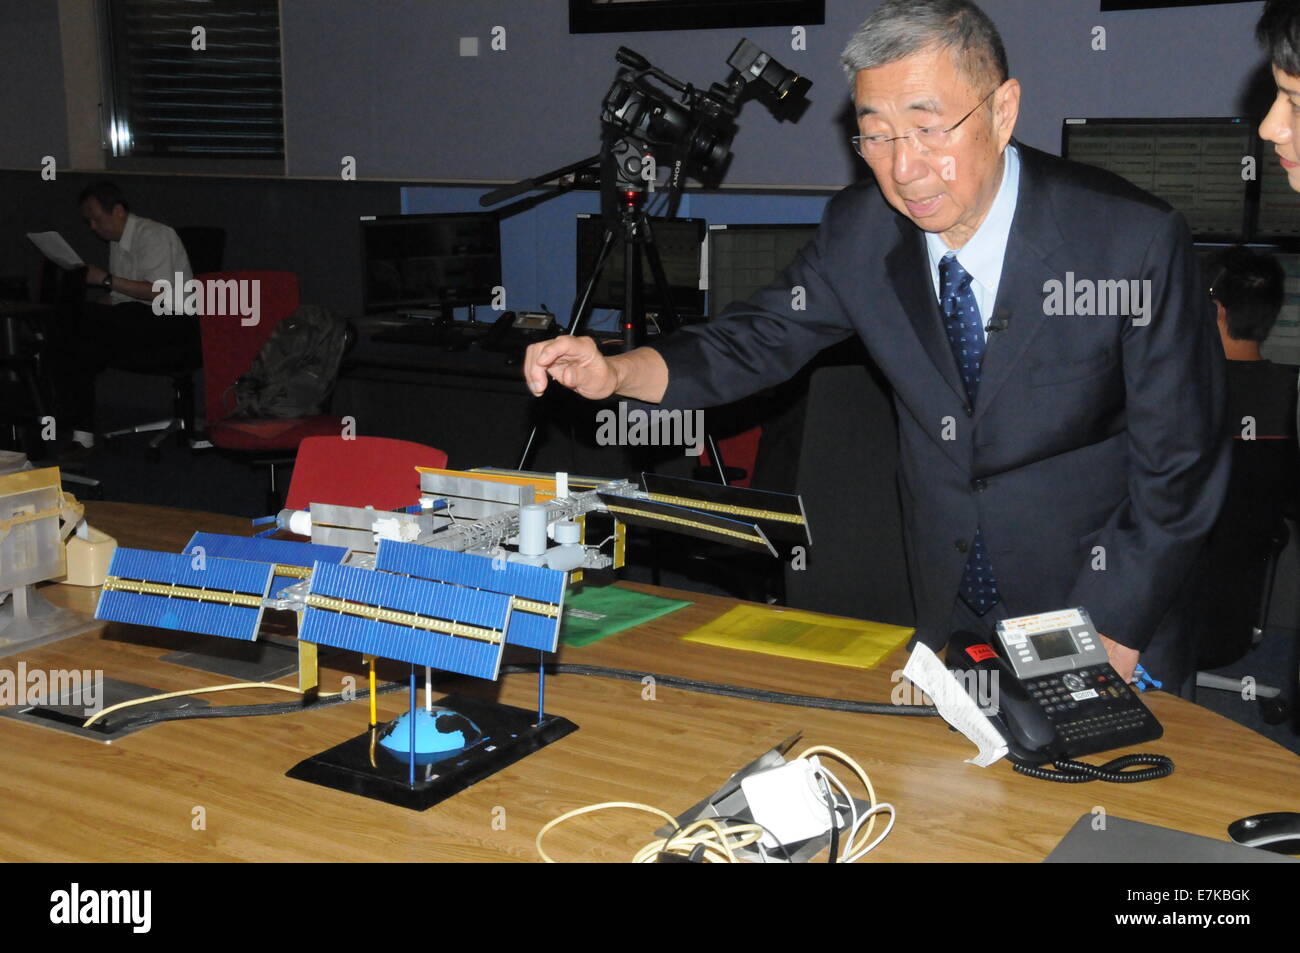 (140920) -- GENEVA, Sept. 20, 2014 (Xinhua) -- Nobel laureate Samuel Ting stands beside a model of the International Space Station (ISS) in the laboratory in Geneva, Switzerland, Sept. 18, 2014. The Alpha Magnetic Spectrometer (AMS) team led by Ting announced on Thursday new results in the search for dark matter, shedding more light on the dark matter existence. Cosmic rays are charged high-energy particles that permeate space. The AMS, a particle physics detector installed on the ISS, is designed to study them before they have a chance to interact with the Earth's atmosphere. (Xinhua/Shi Ji Stock Photo